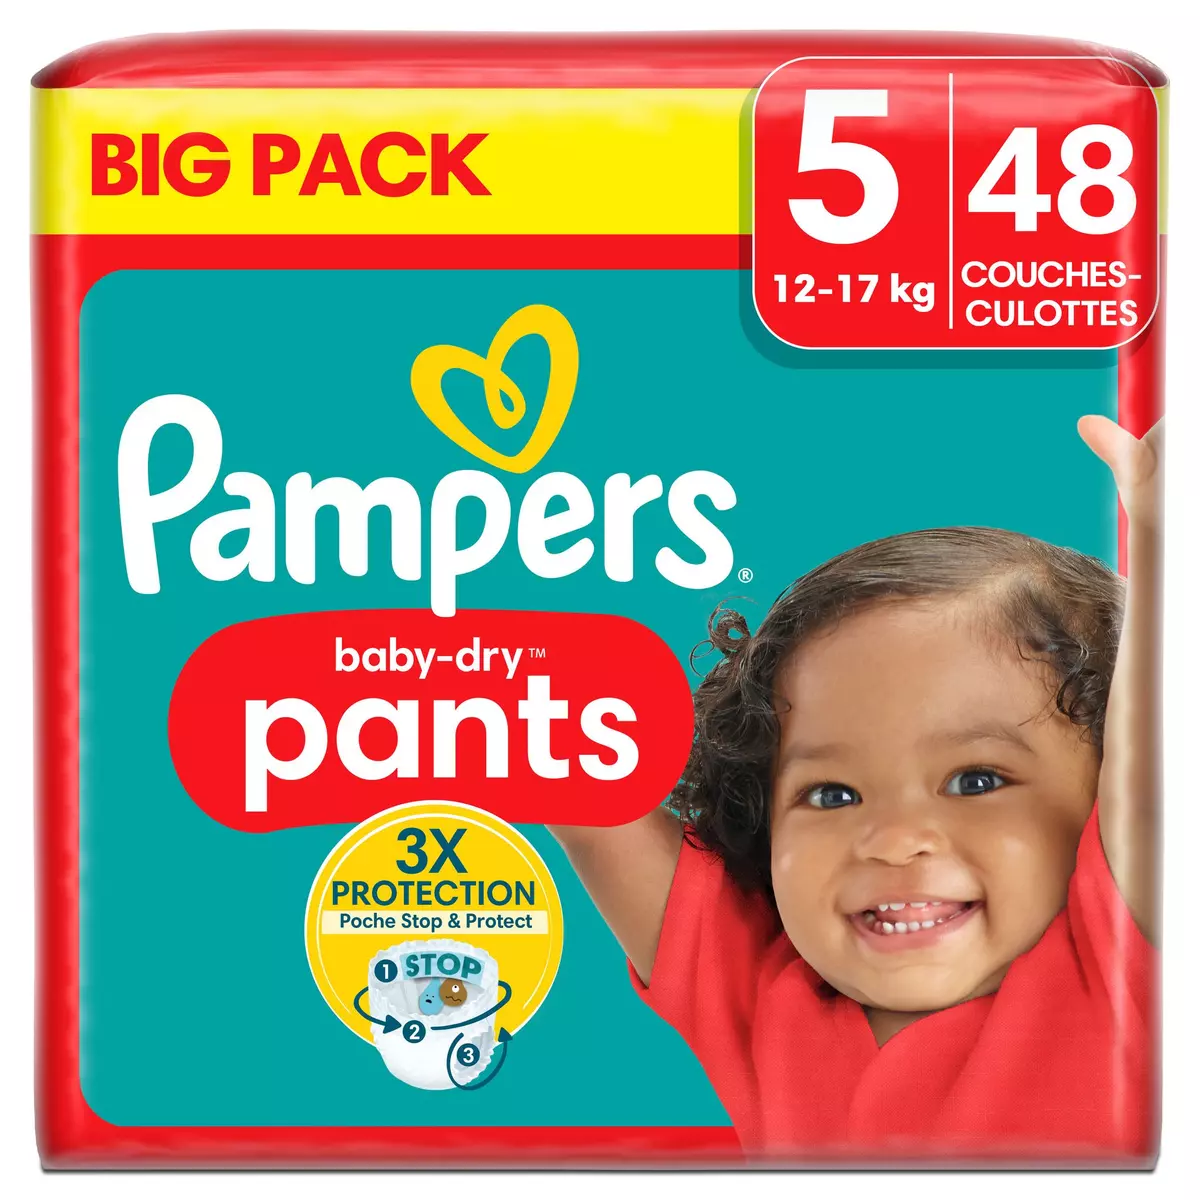 PAMPERS Baby-dry pants couche culottes taille 5 (12-17kg) 48 couches